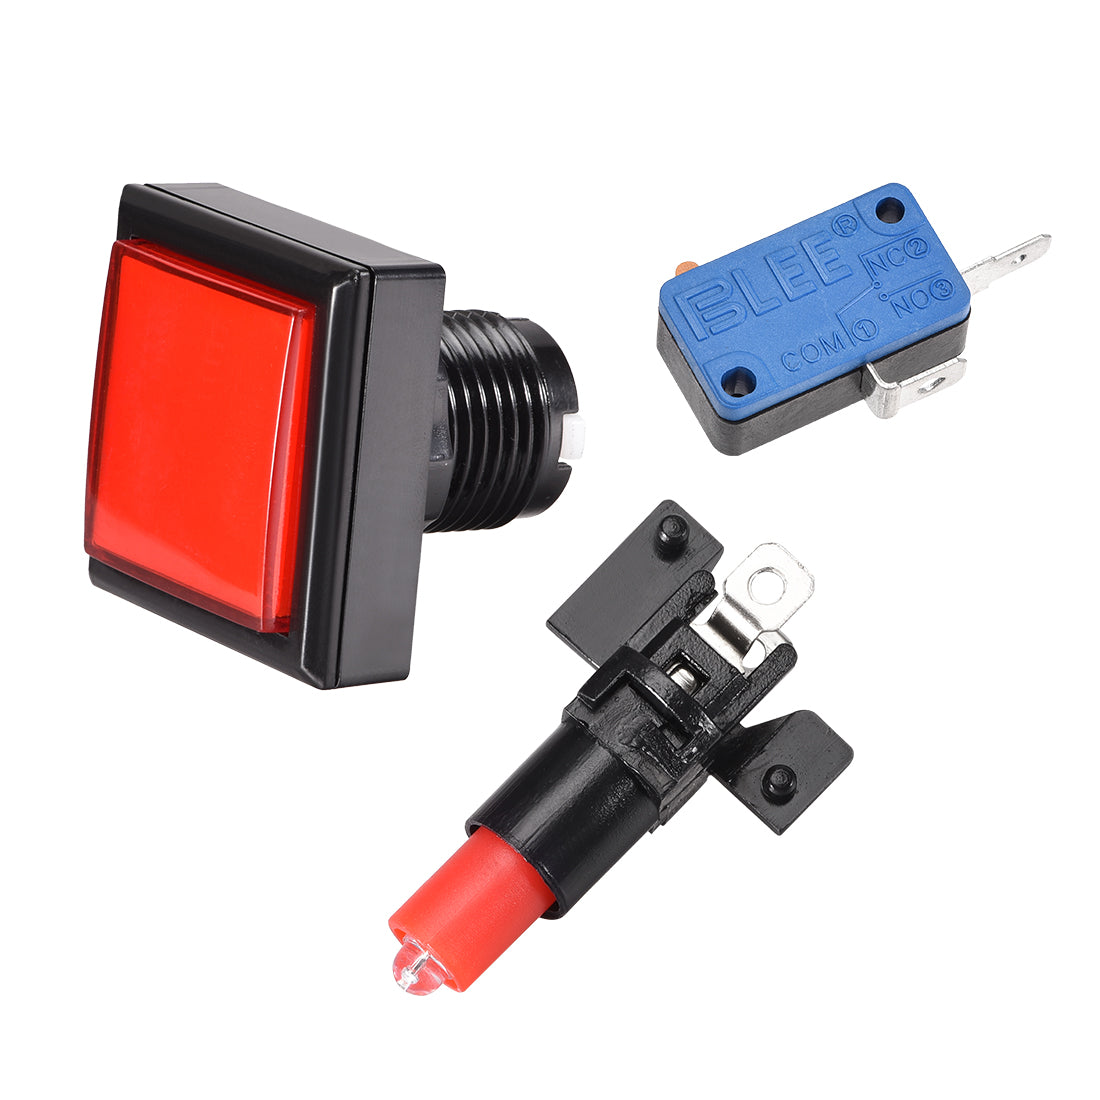 uxcell Uxcell Game Push Button Square LED Illuminated Push Button Switch with Micro switch for Arcade Video